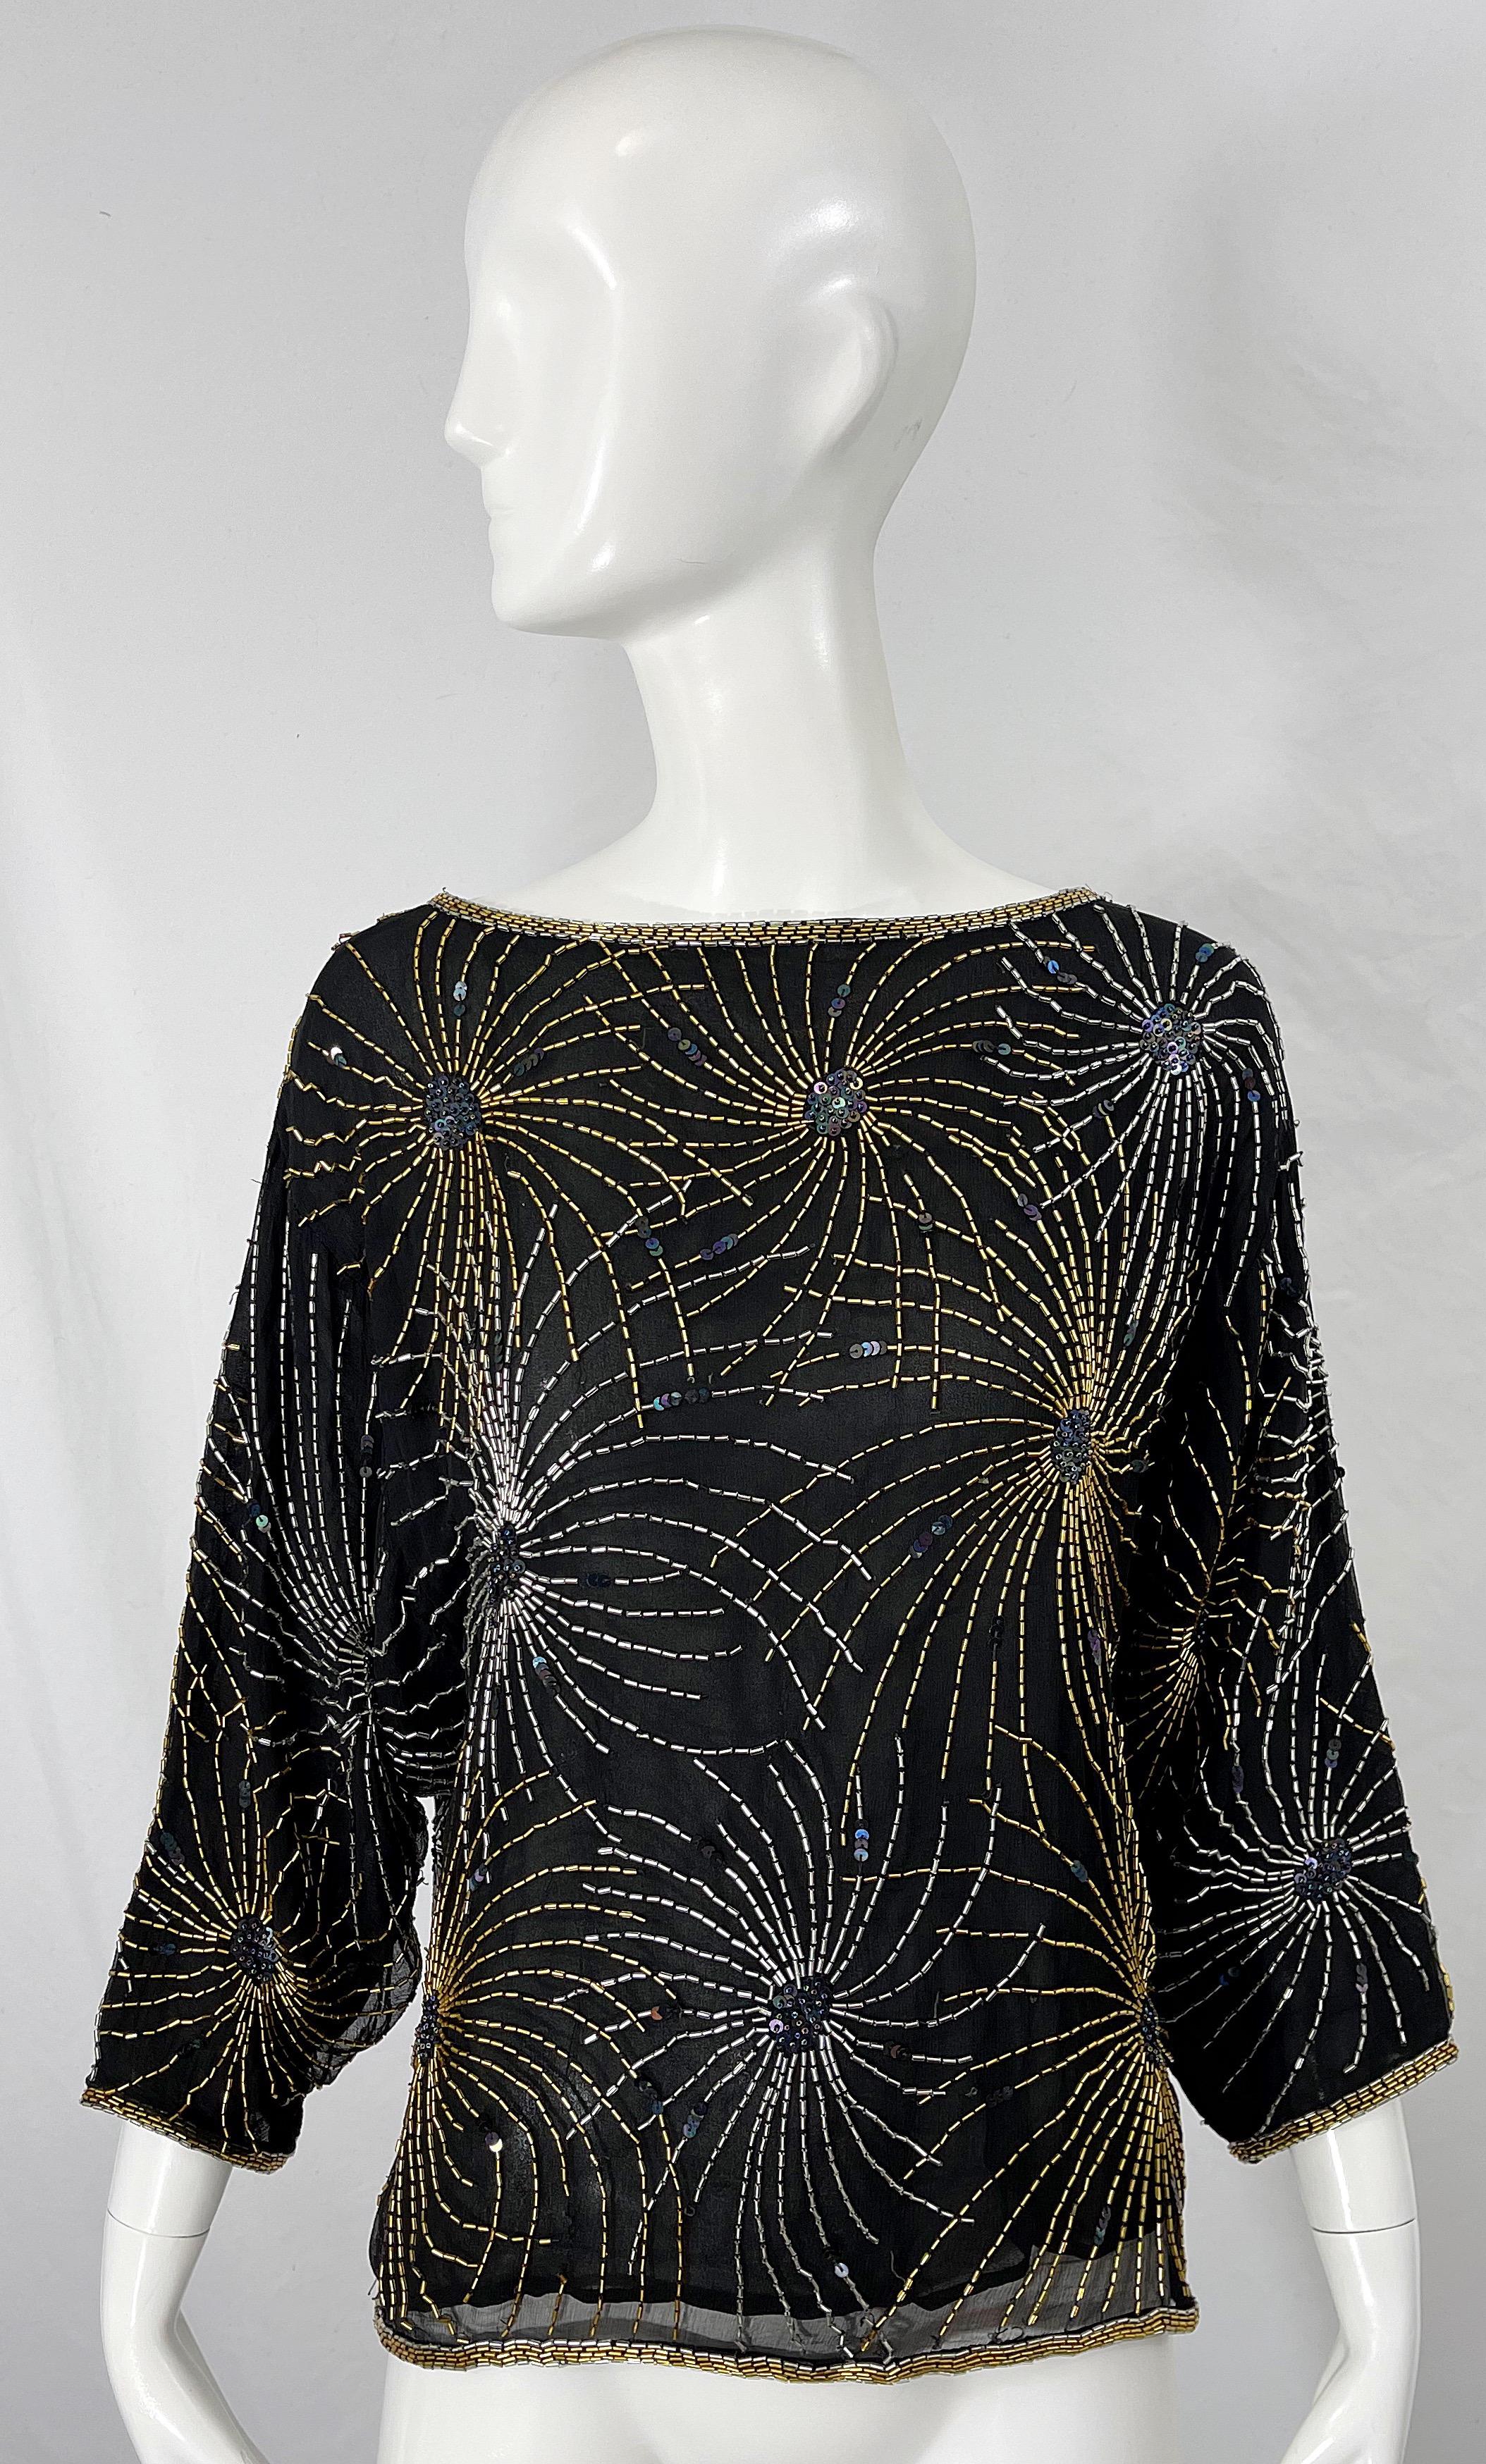 Halston 1970s Iconic Fireworks Beaded Black Silk Chiffon Vintage 70s Blouse Top For Sale 10